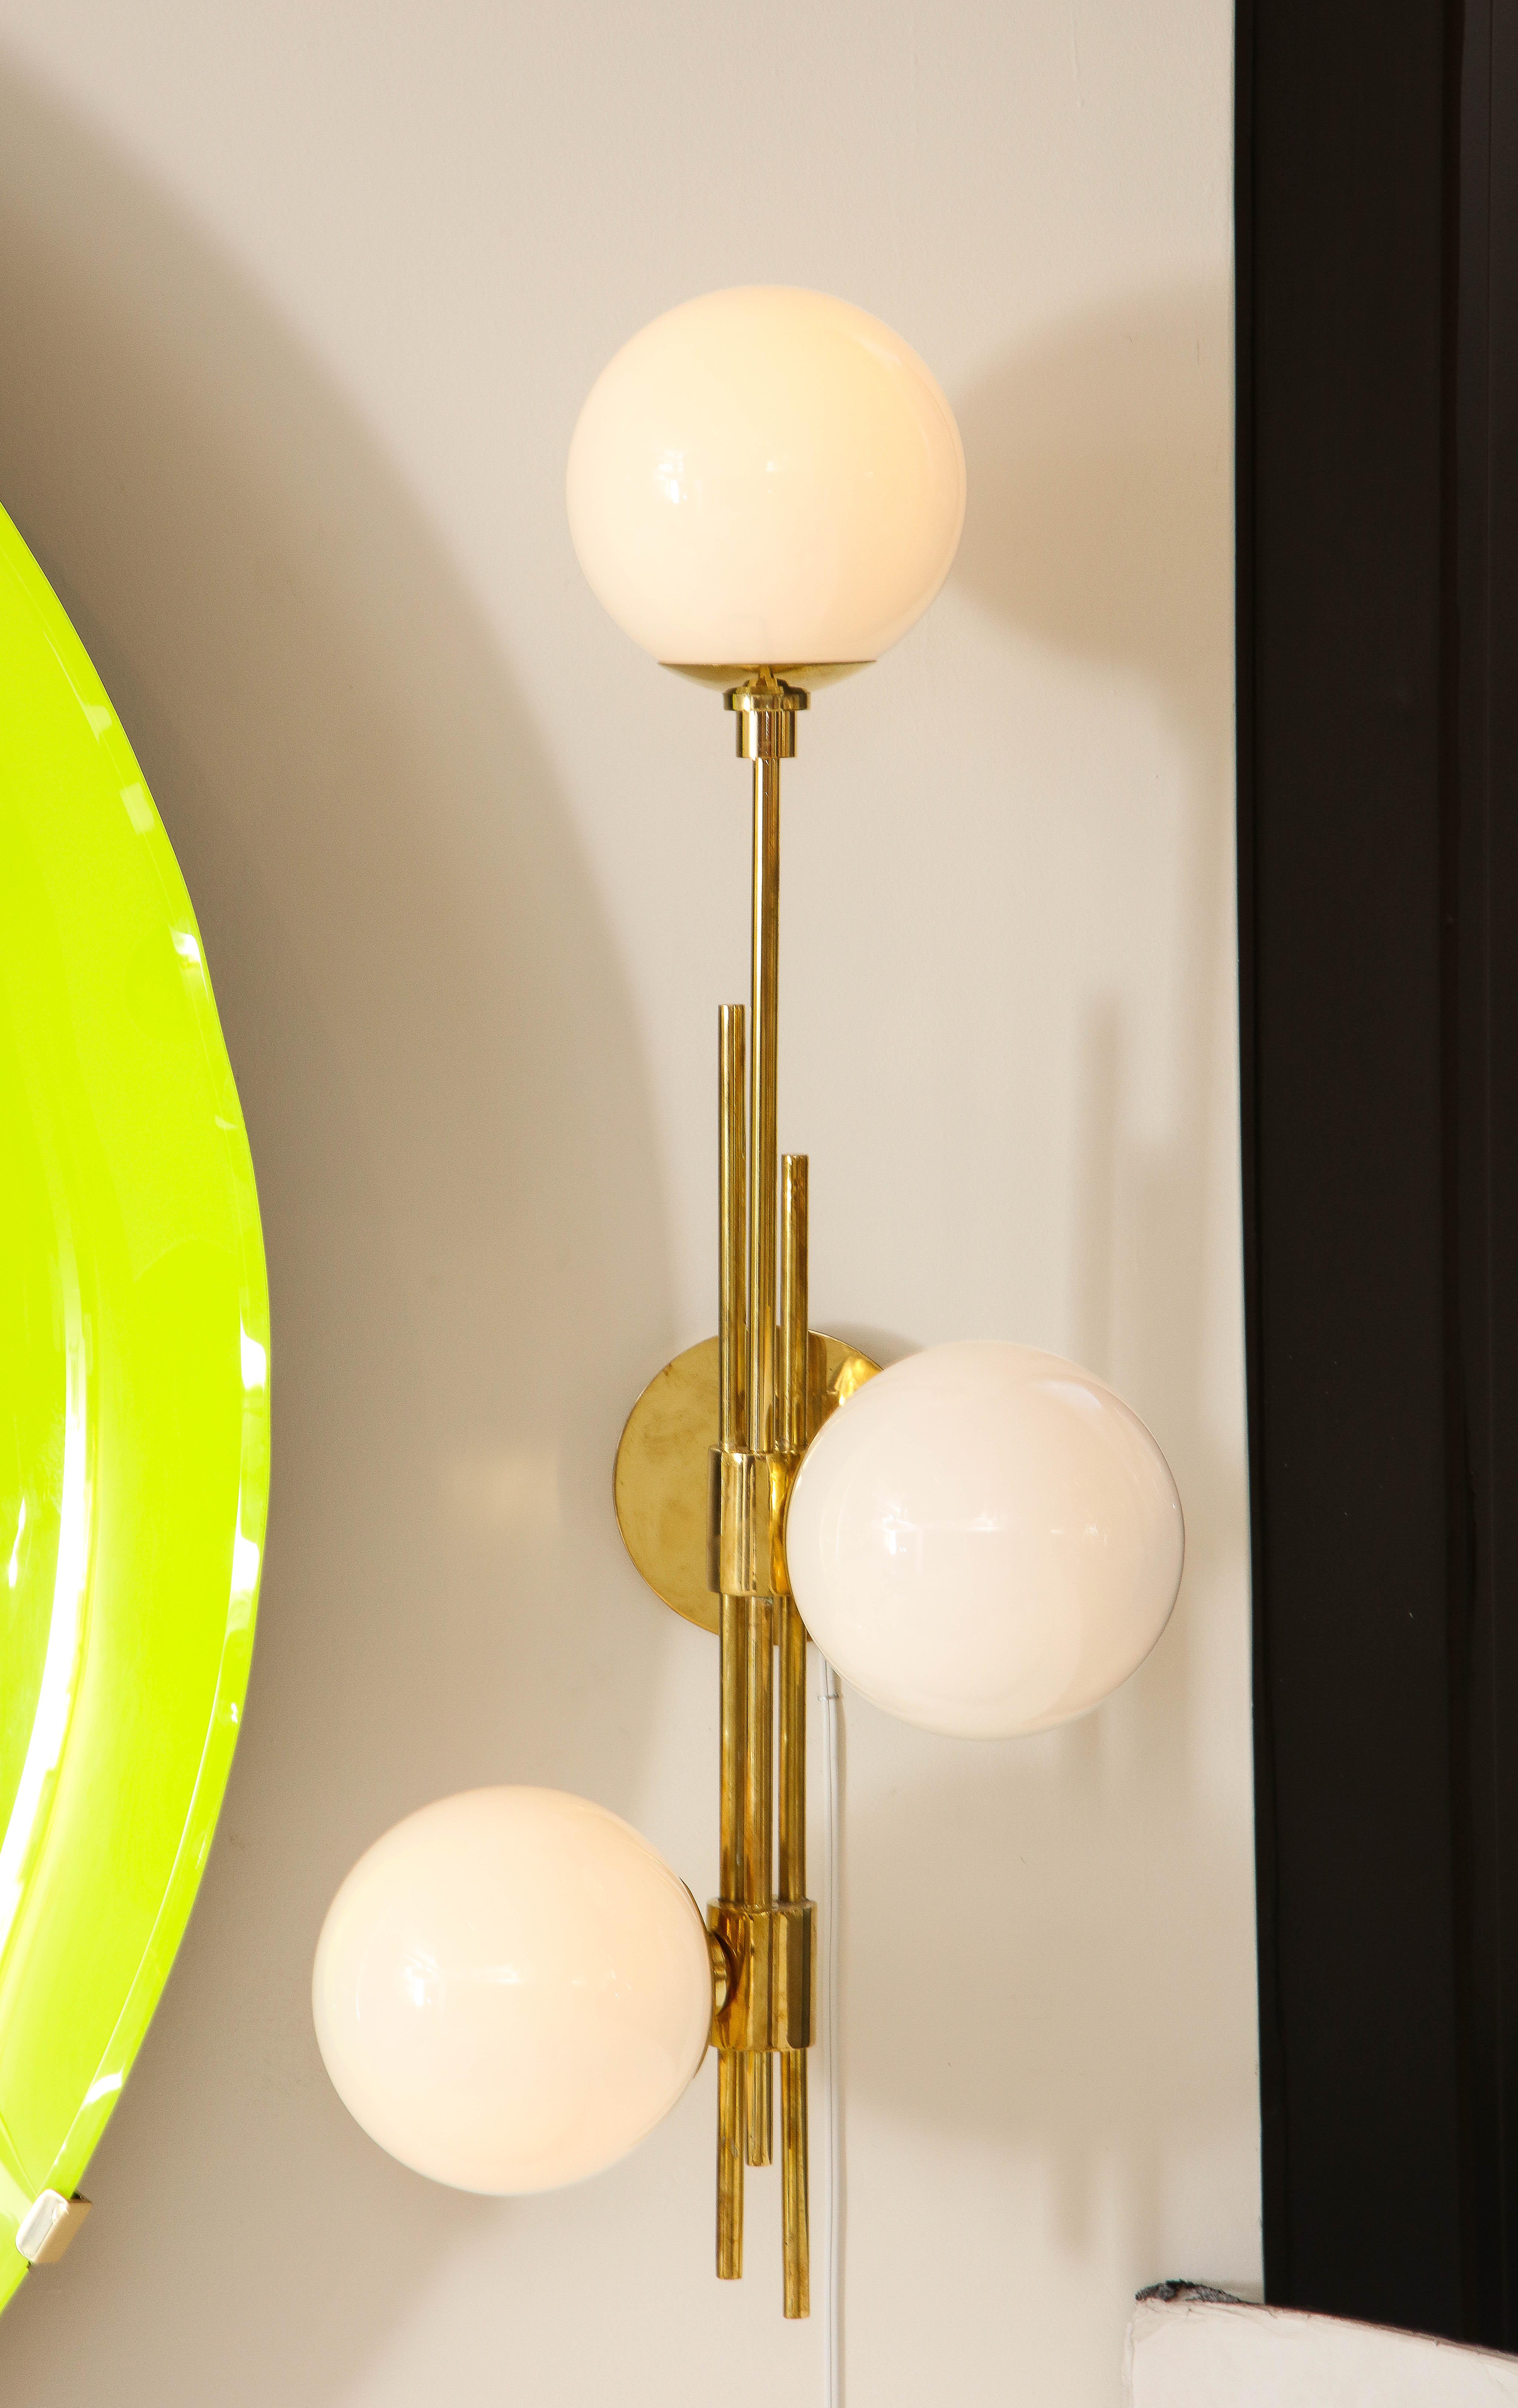 Tall Pair of Translucent White Murano Glass Globes and Brass Sconces, Italy 2022 In New Condition For Sale In New York, NY